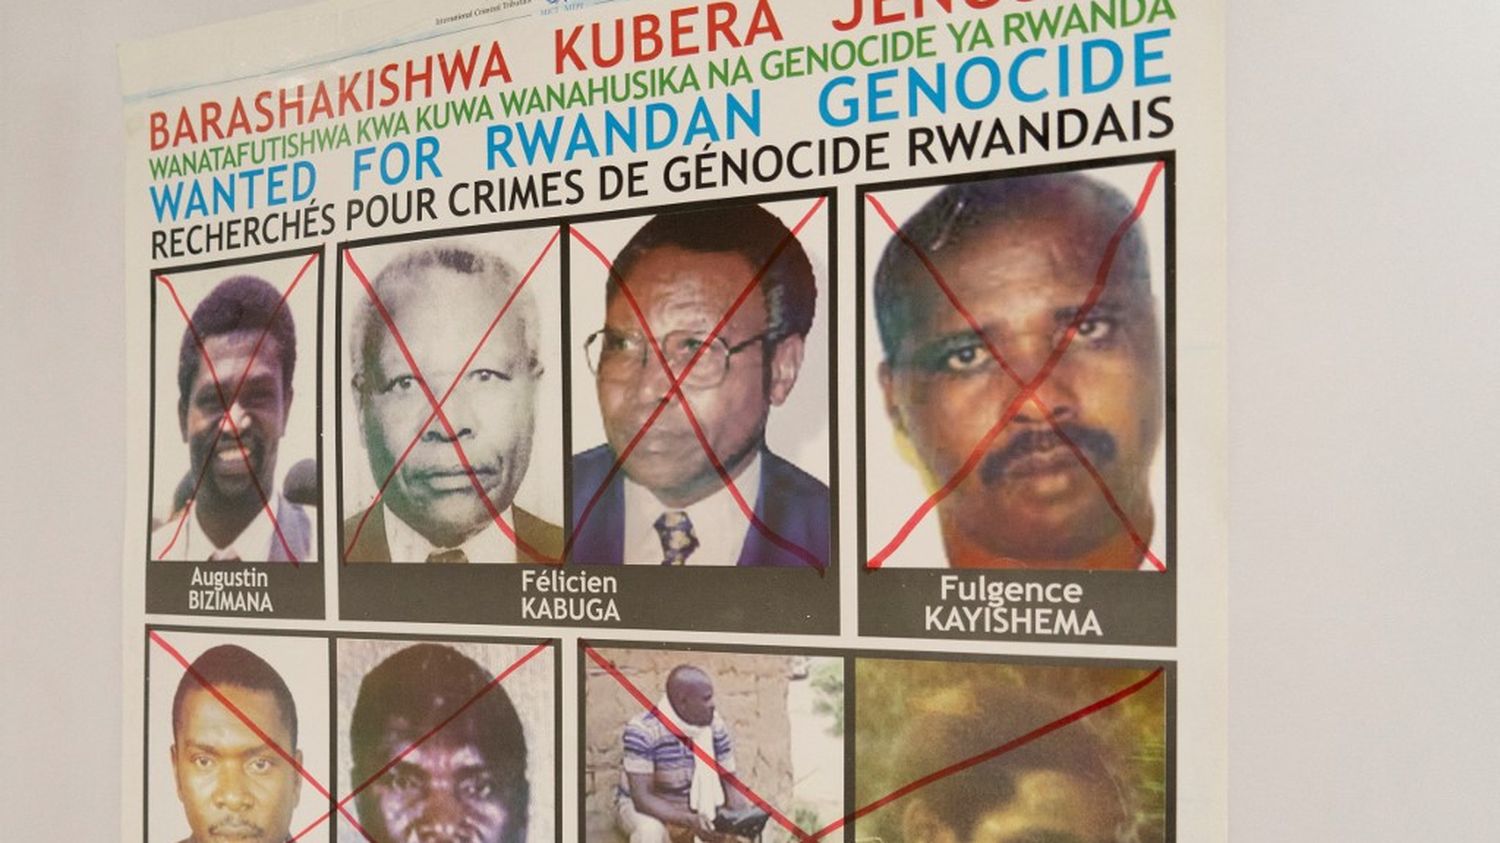 Genocide in Rwanda: one of the last wanted fugitives arrested in South Africa
